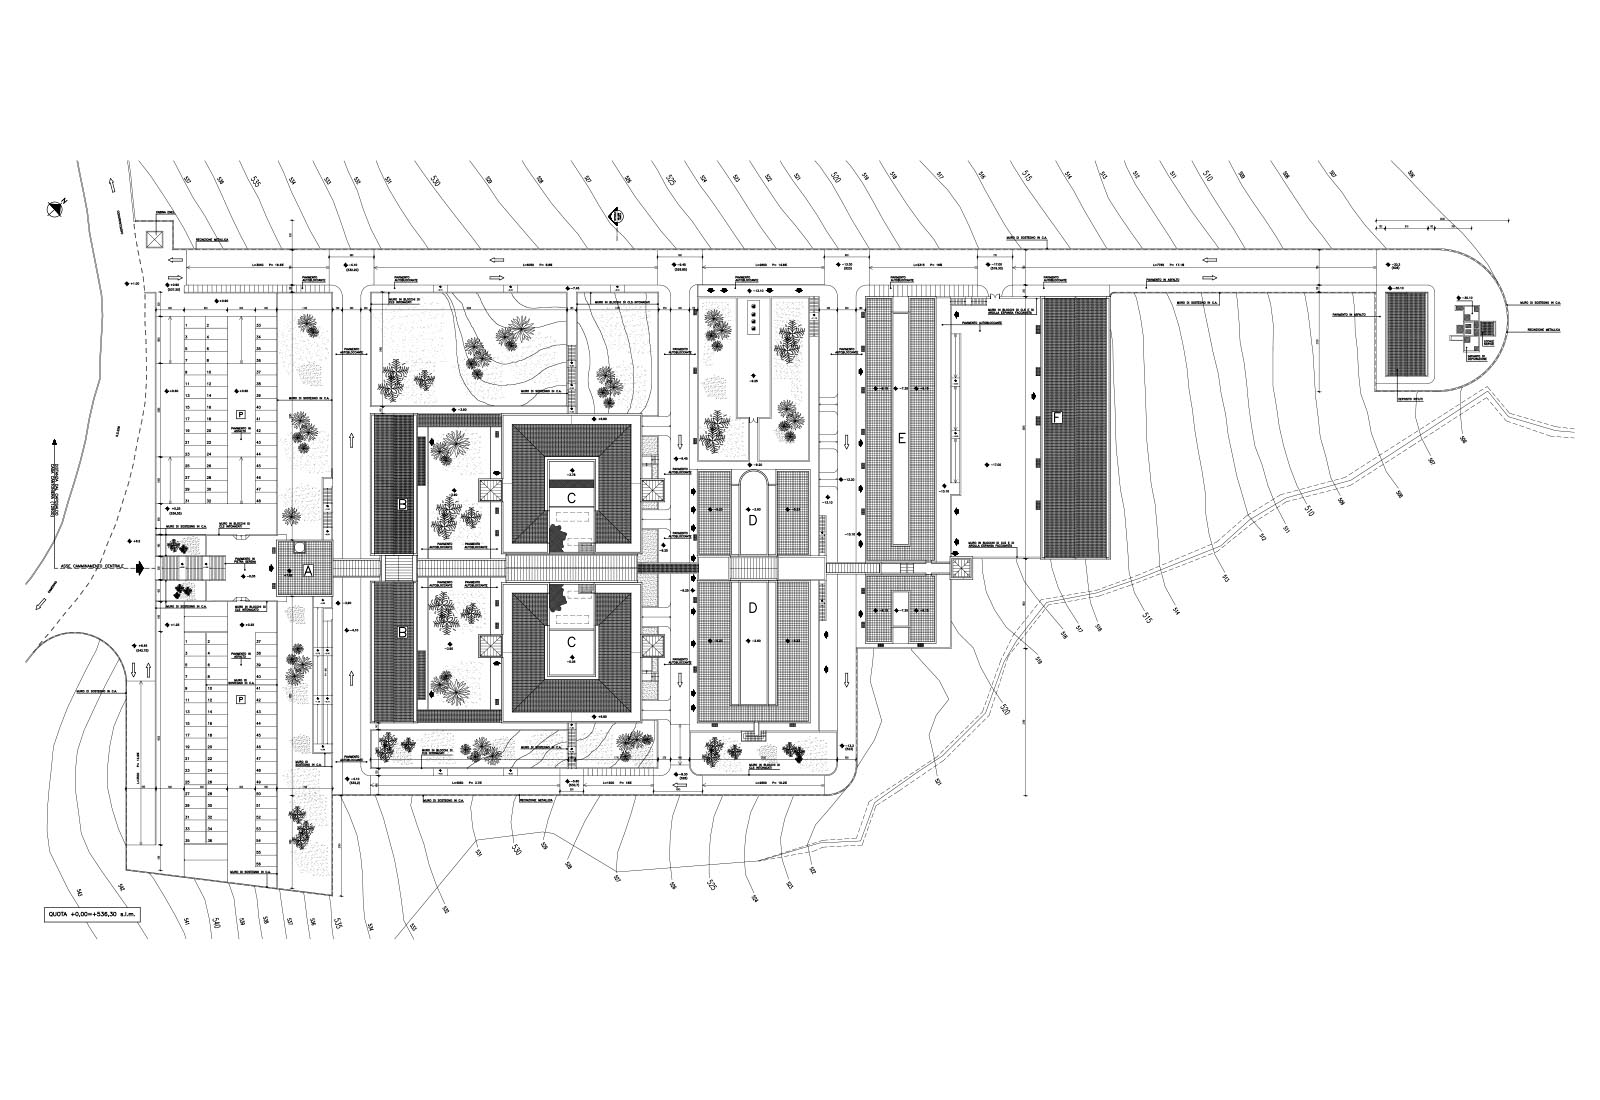 Faculty of Veterinary in Camerino - General project plan